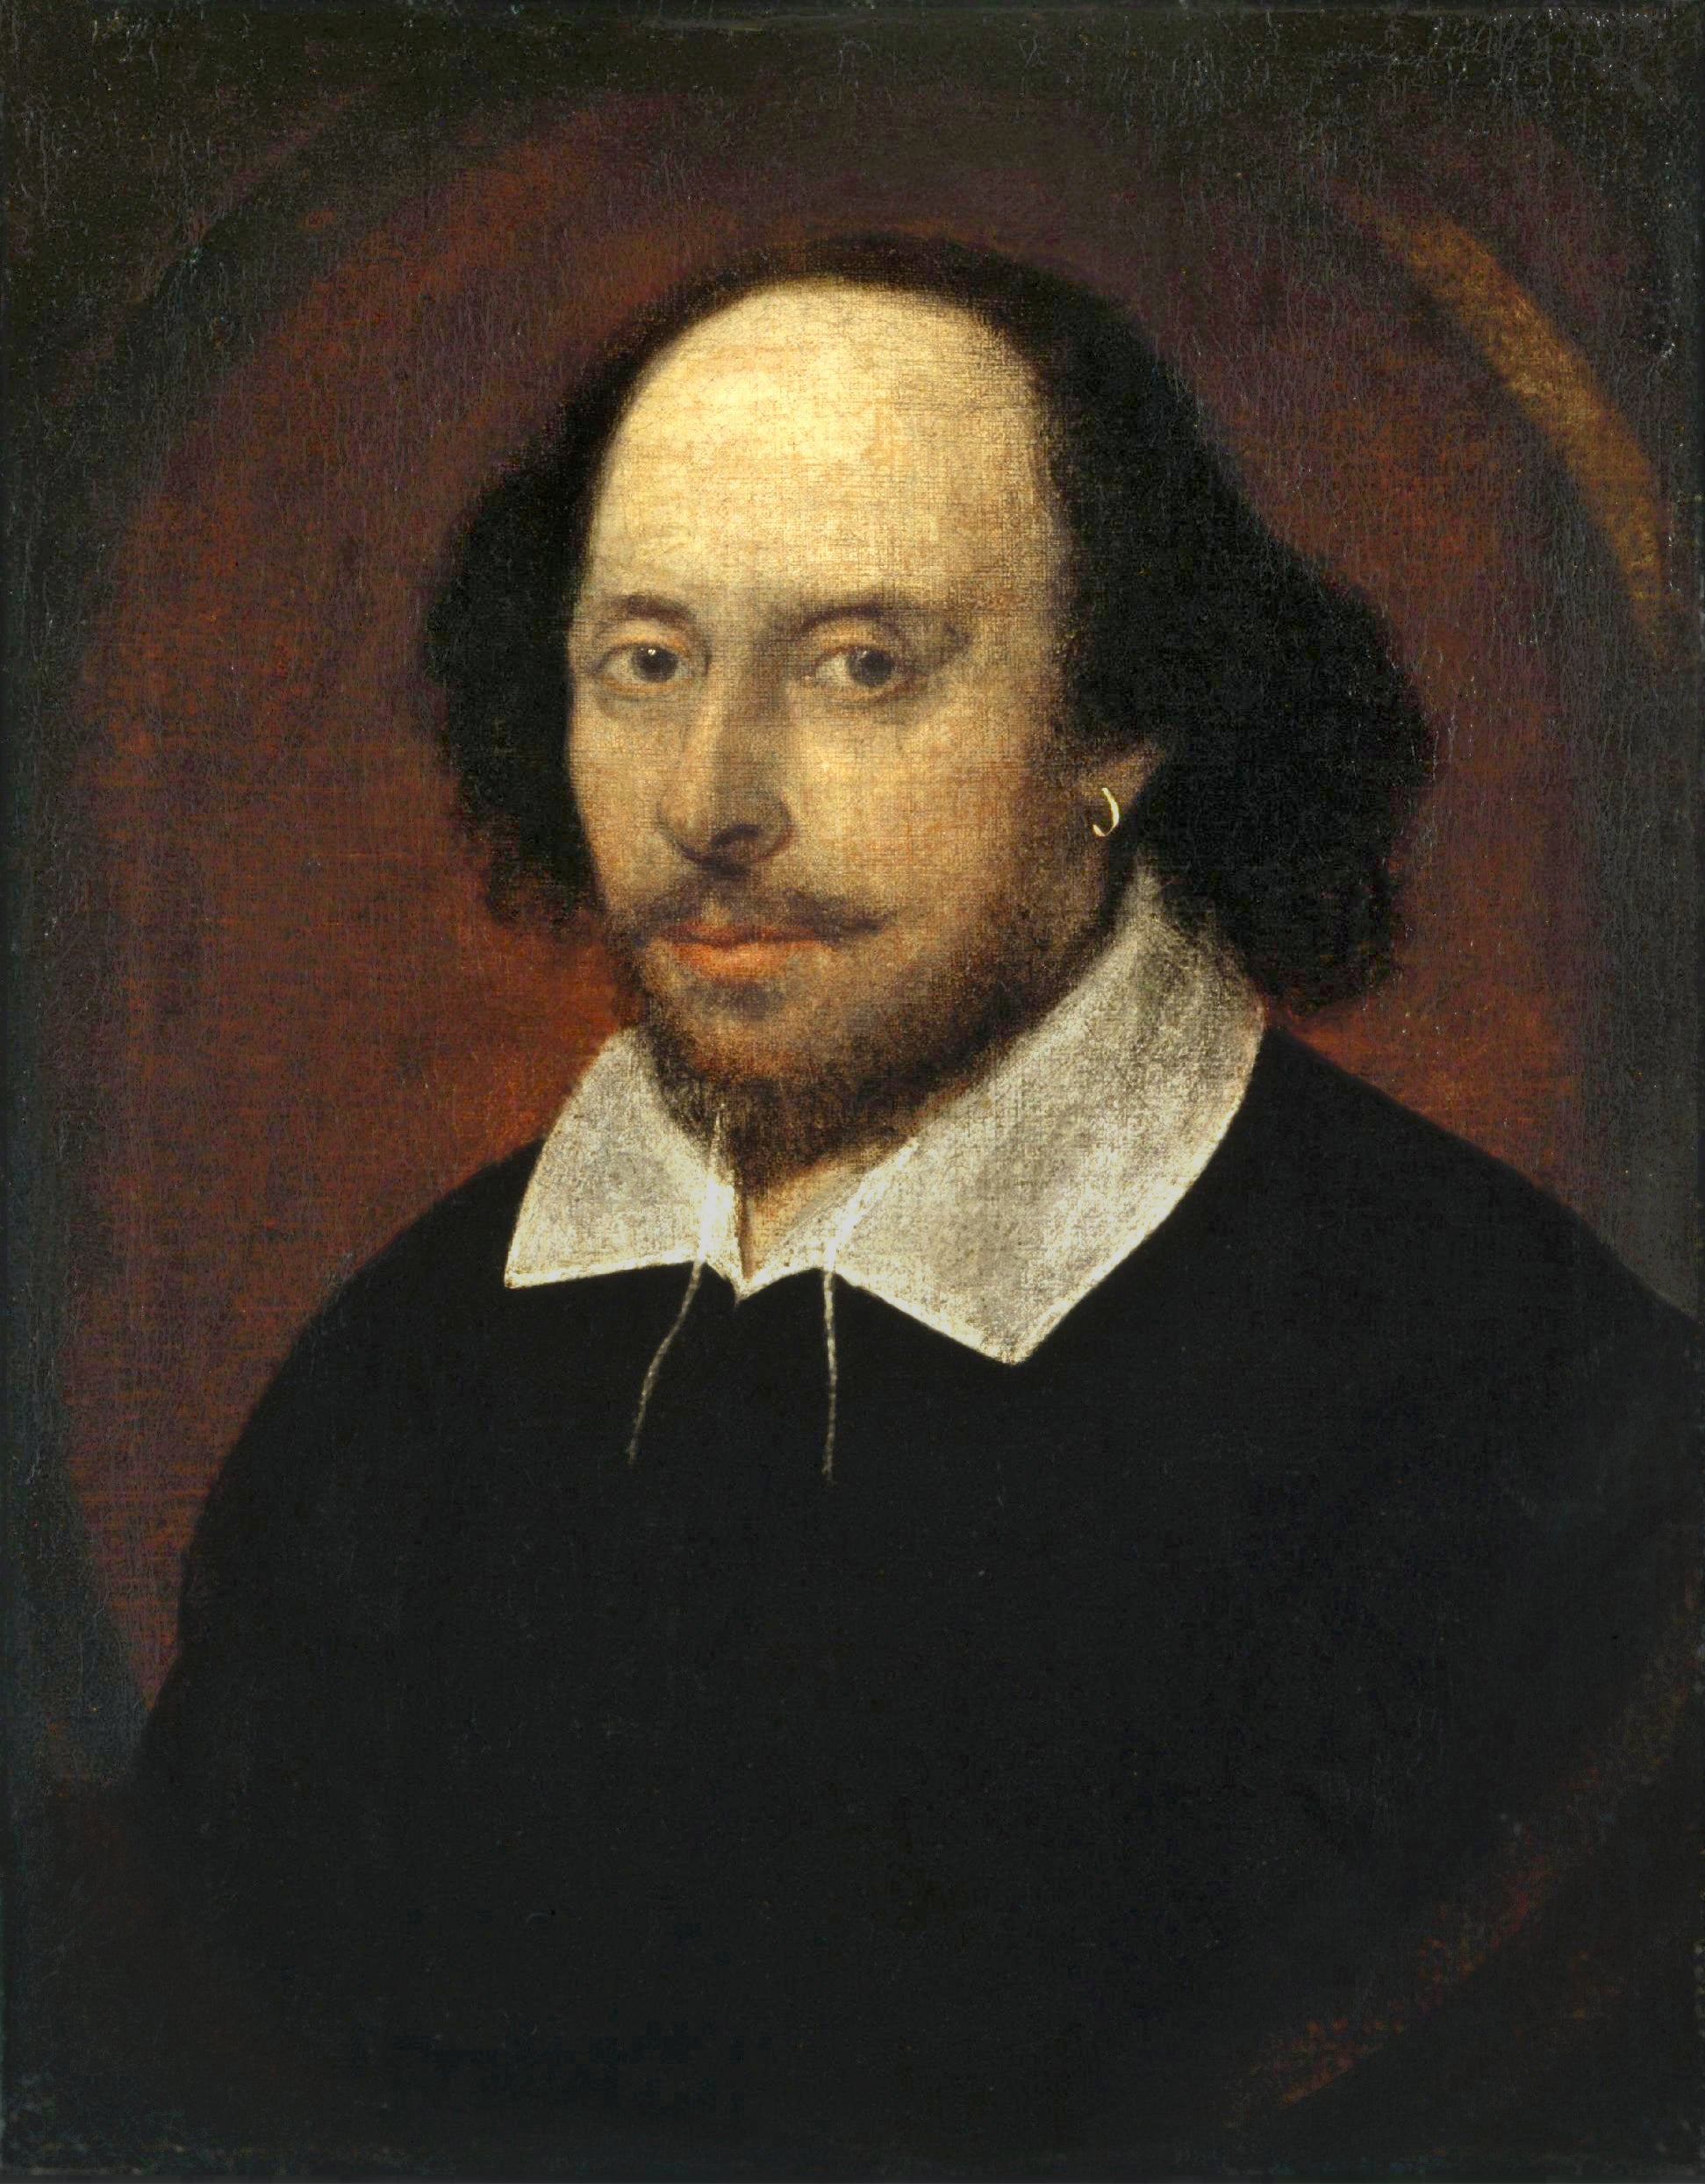 The London Library has been slammed for hosting an event that questions the Bard’s authorship